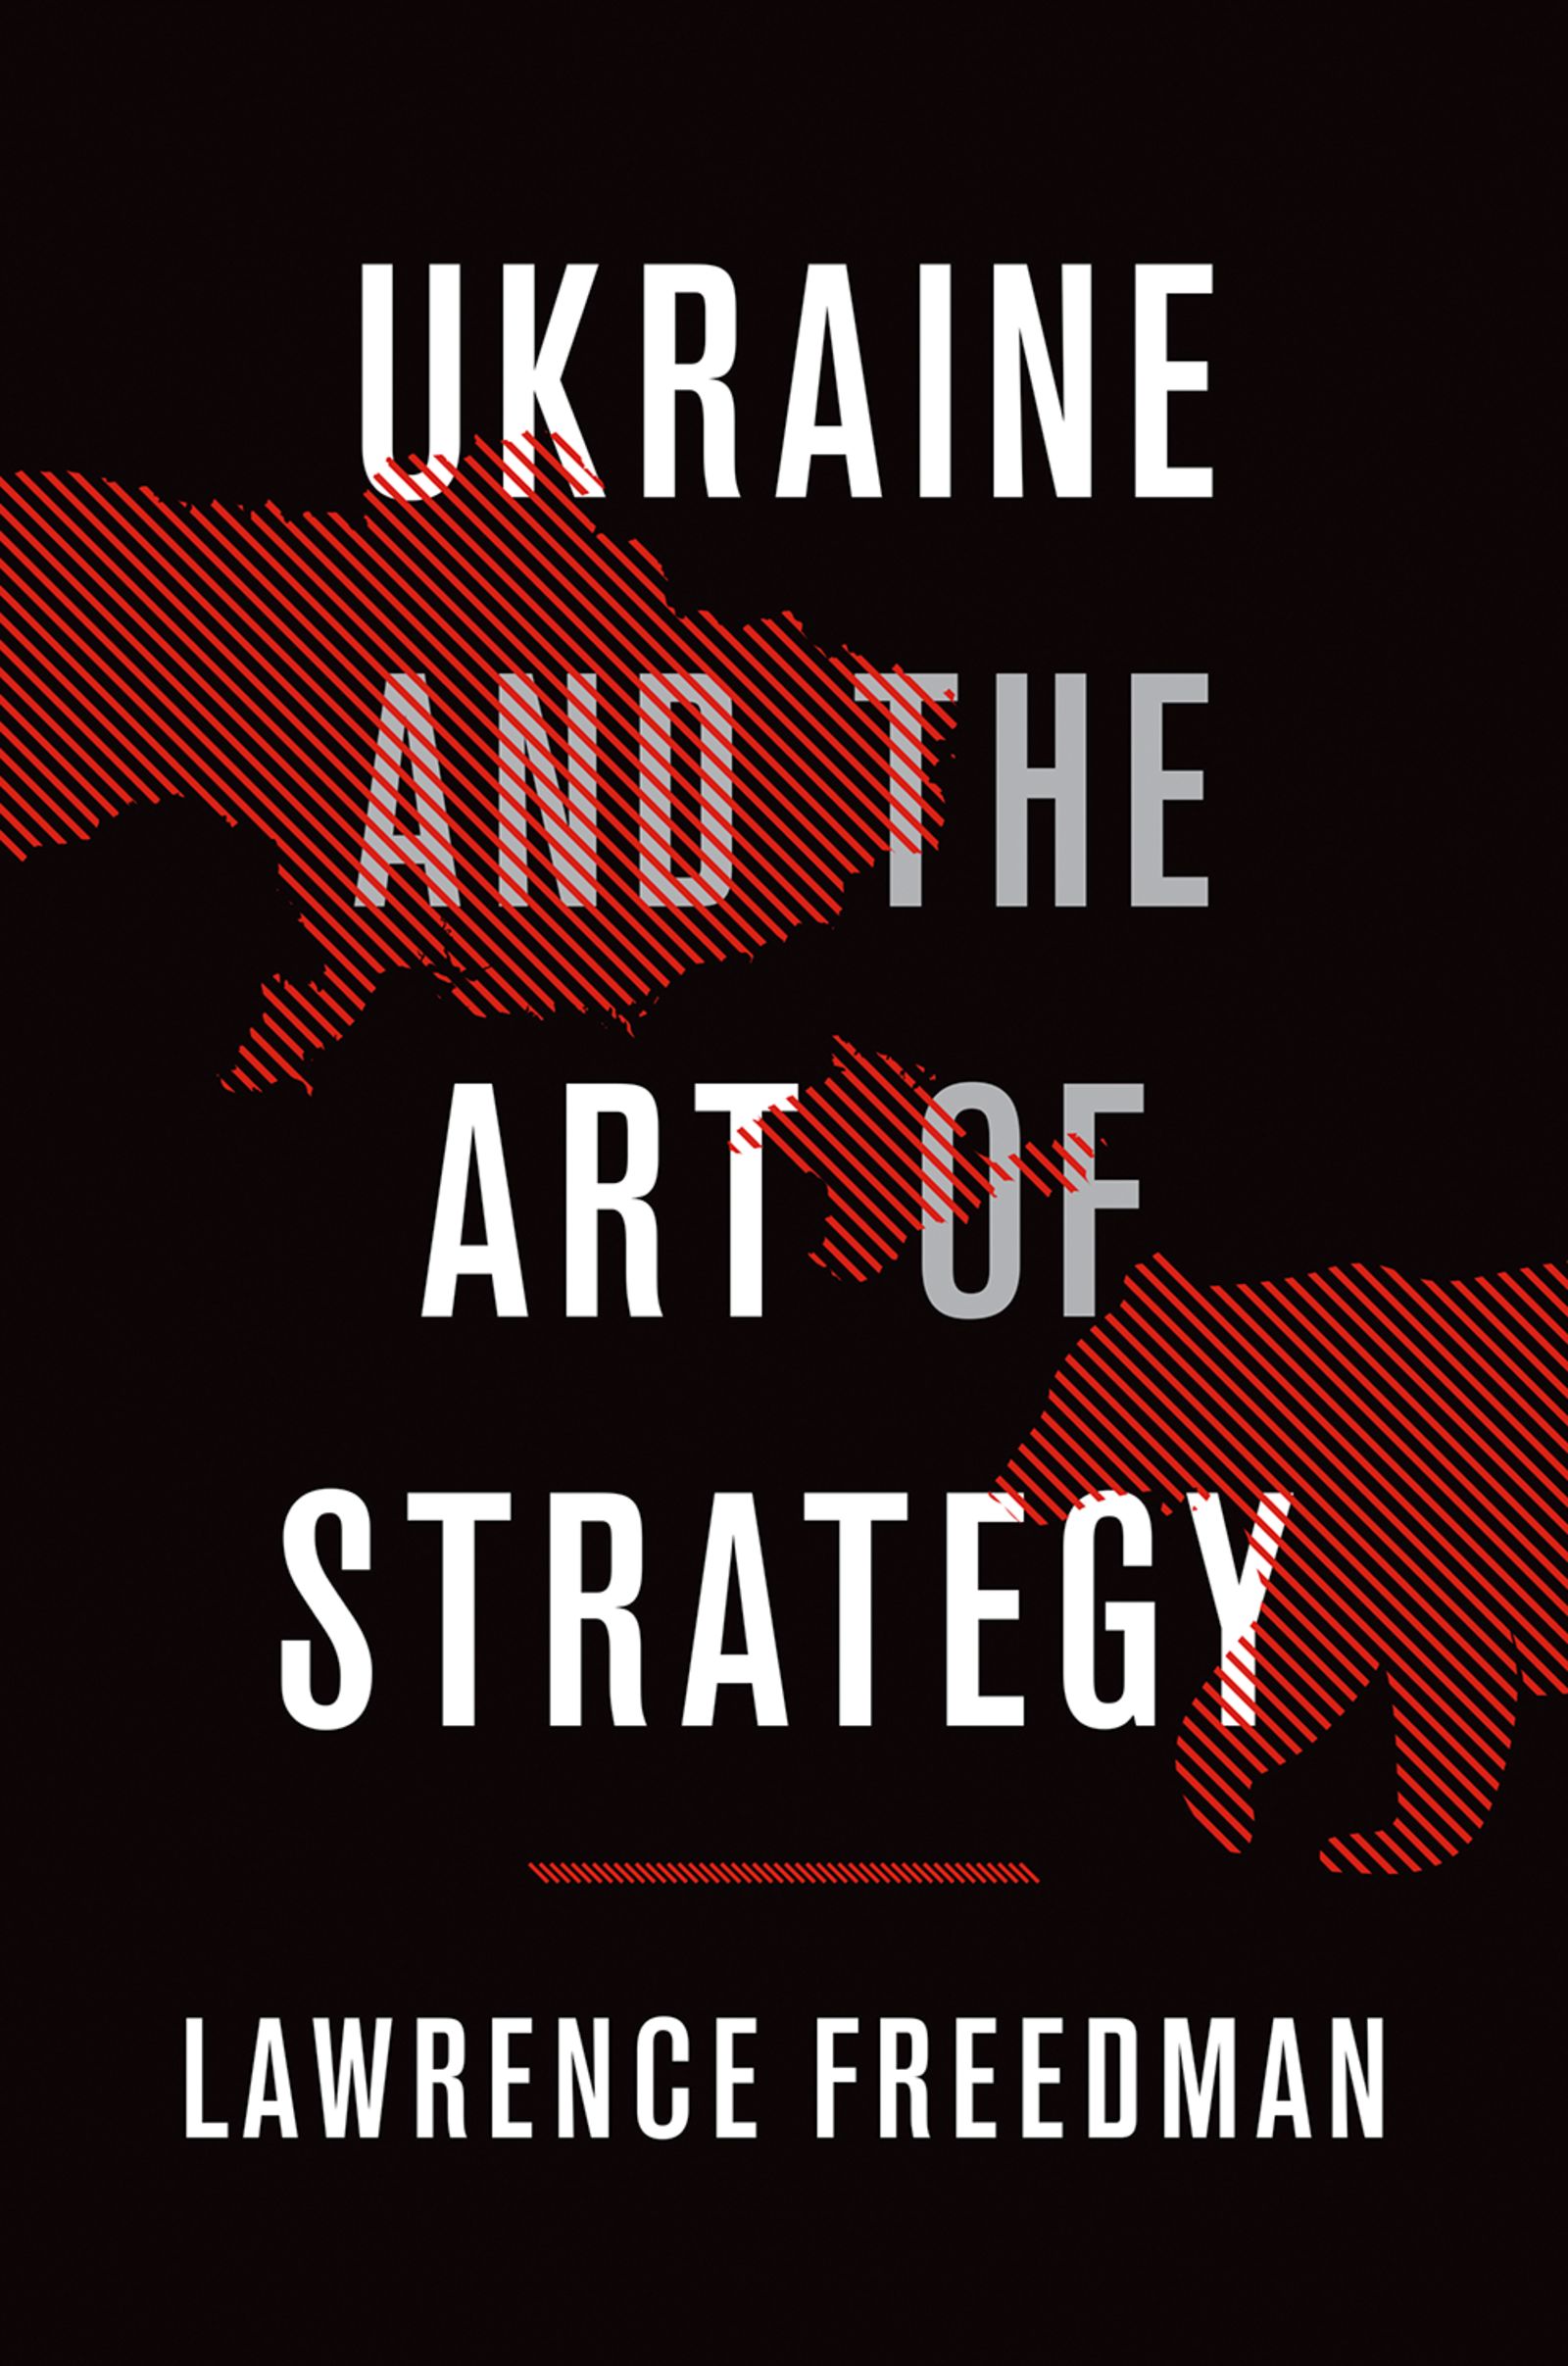 Ukraine and the Art of Strategy